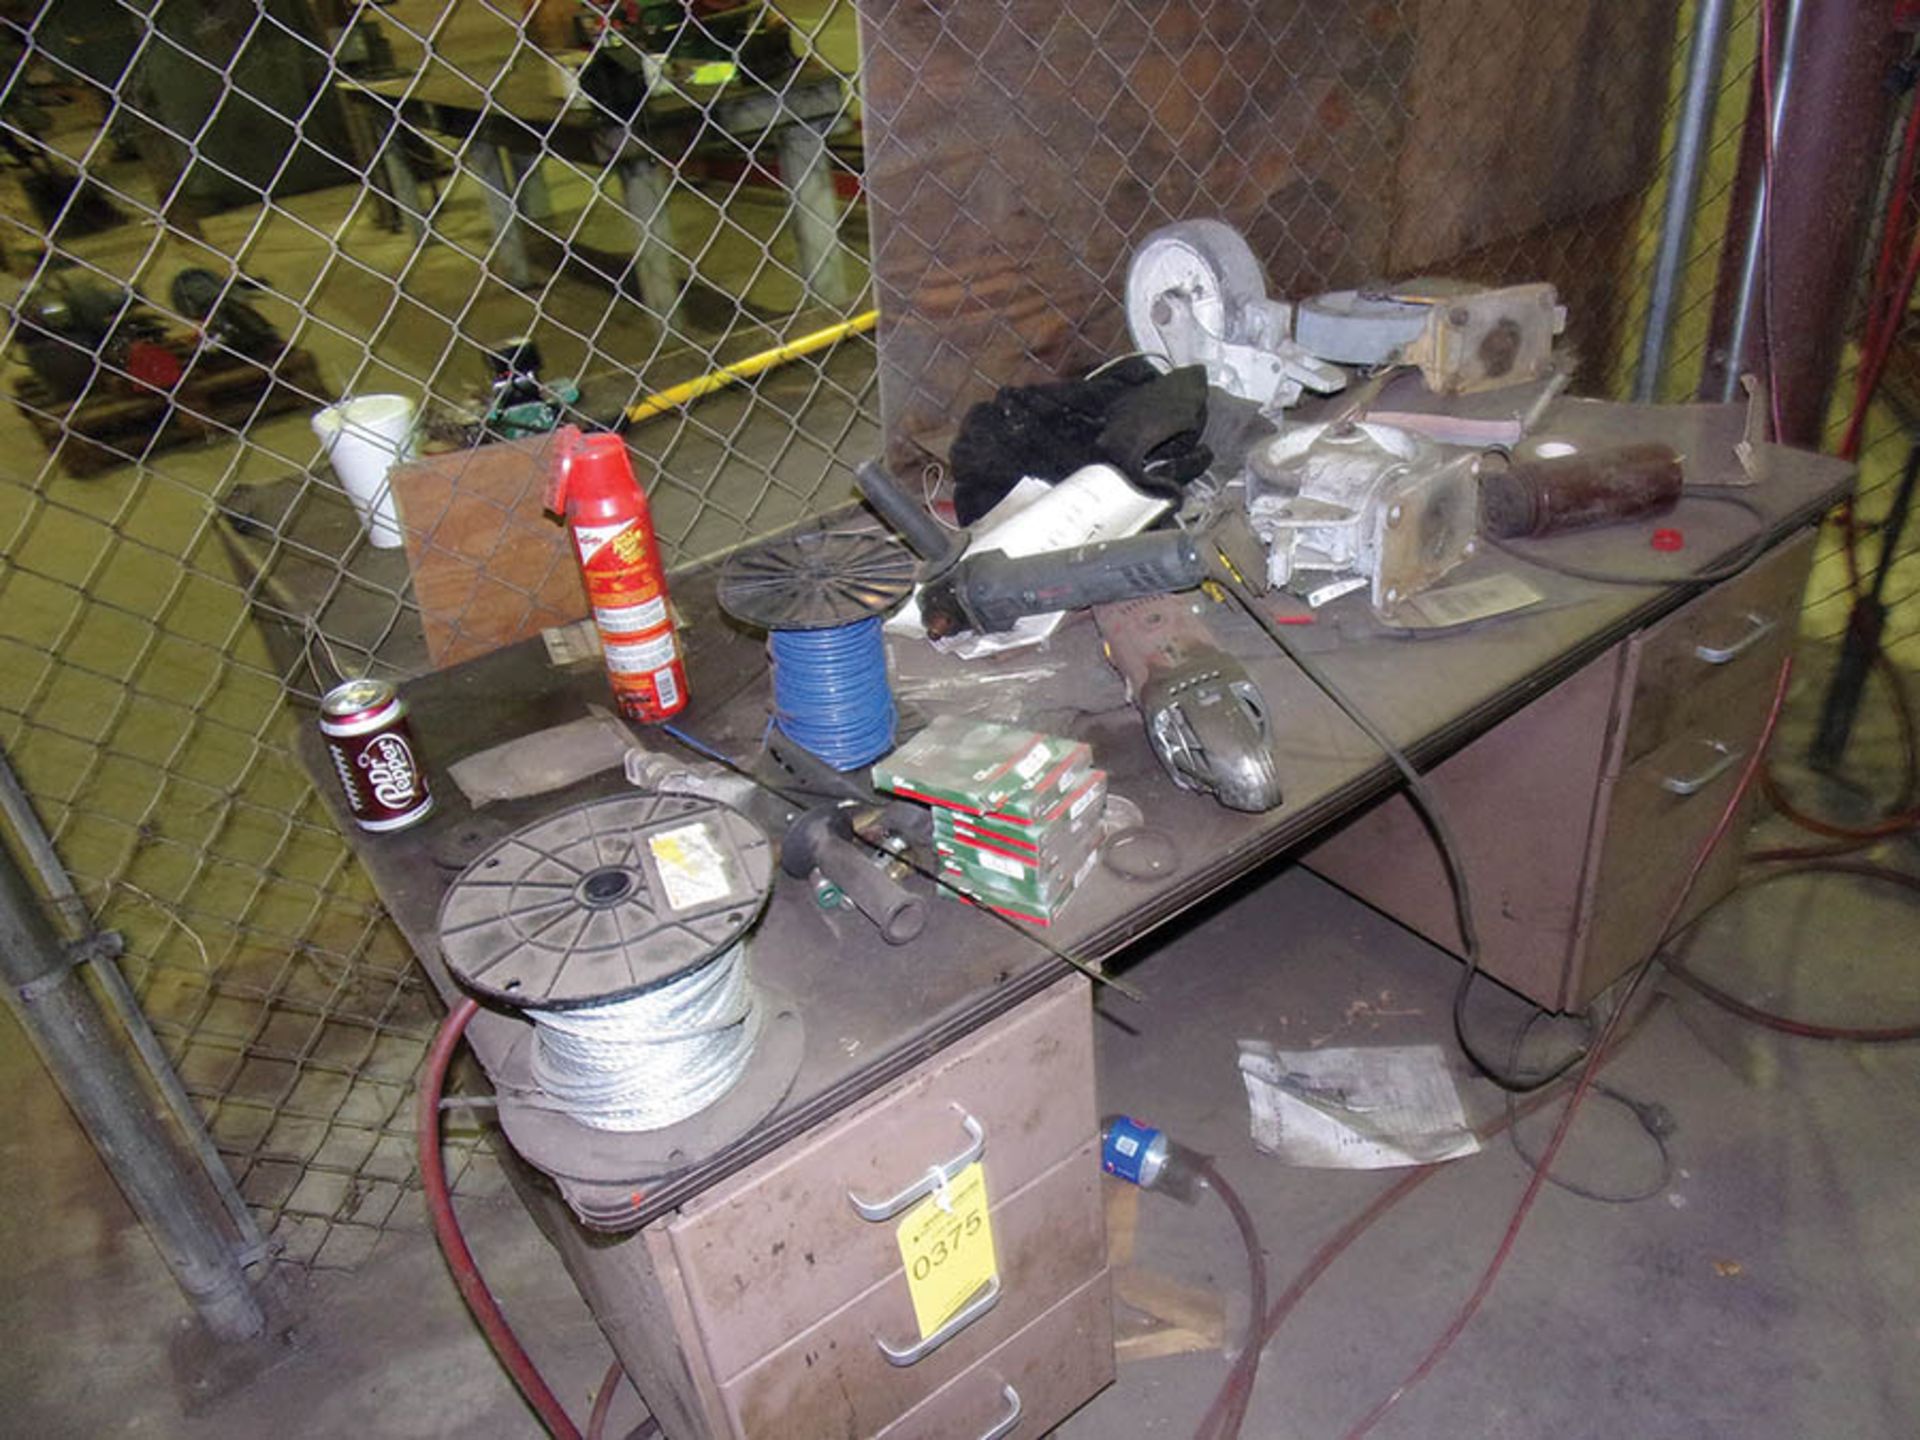 CONTENTS OF PARTS TABLES, WIRE, AND PARTS